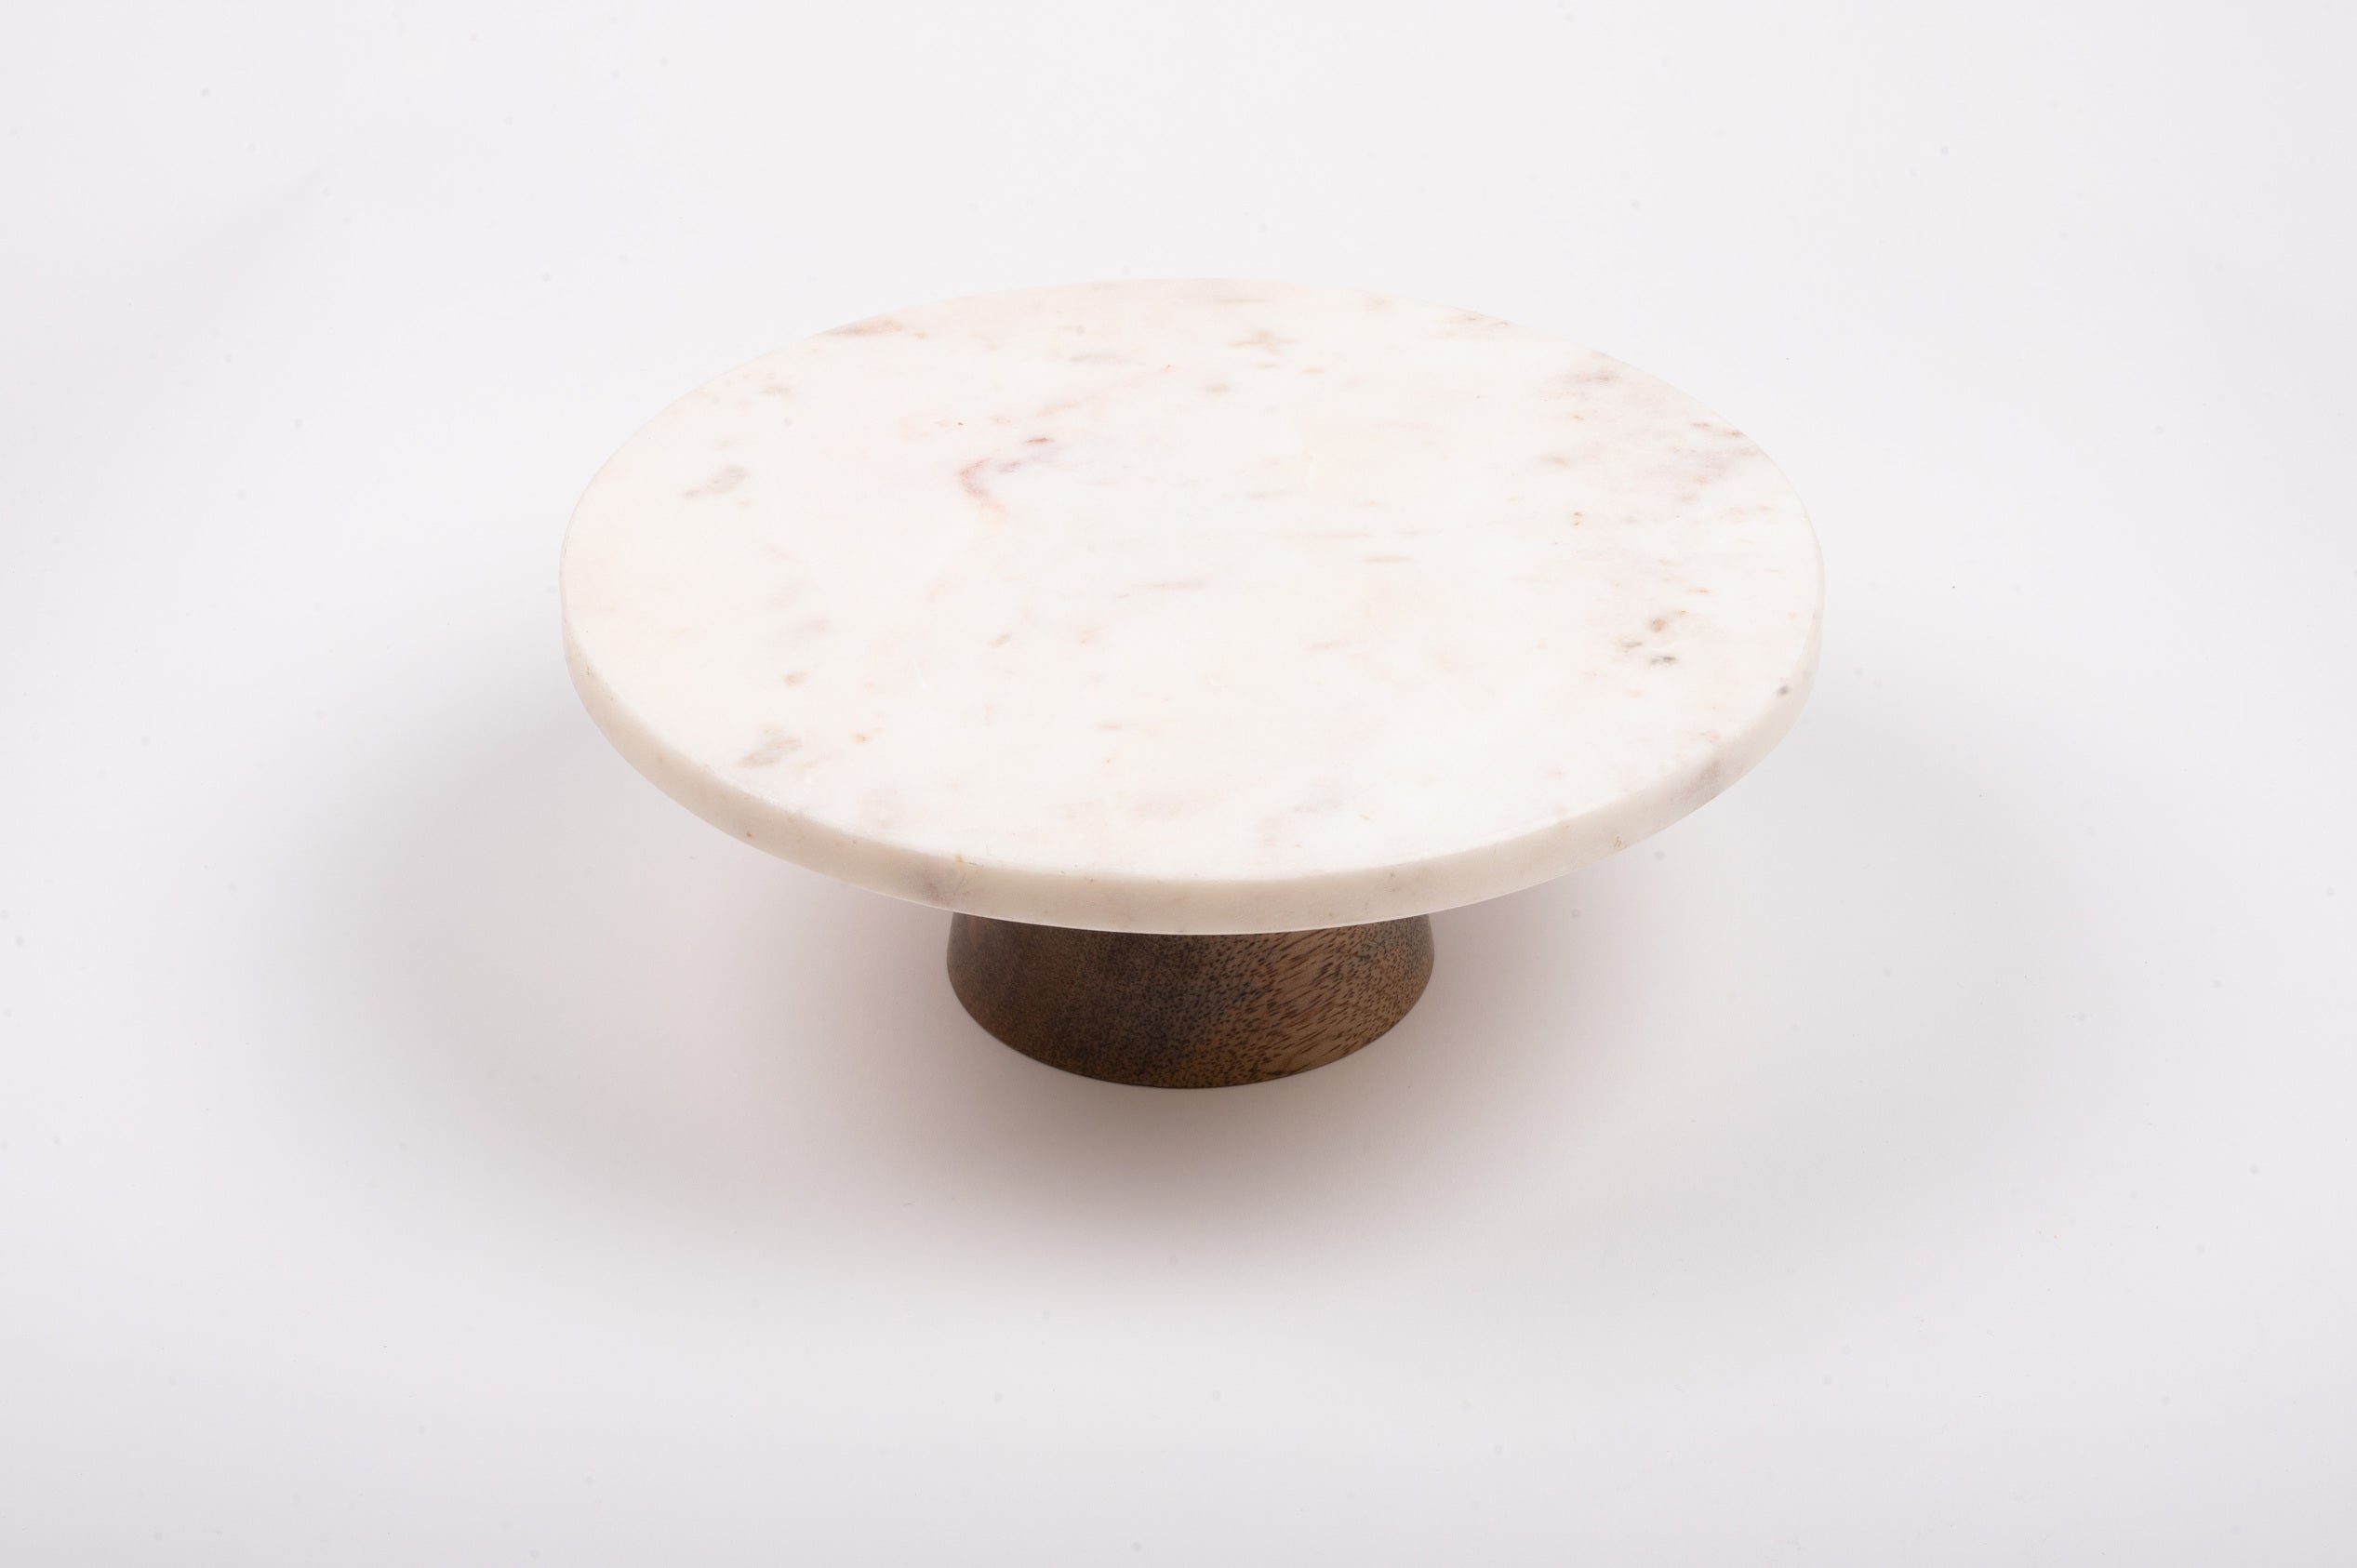 NikkisPride Marble Cake Stand With Wooden Base - directcreate.com